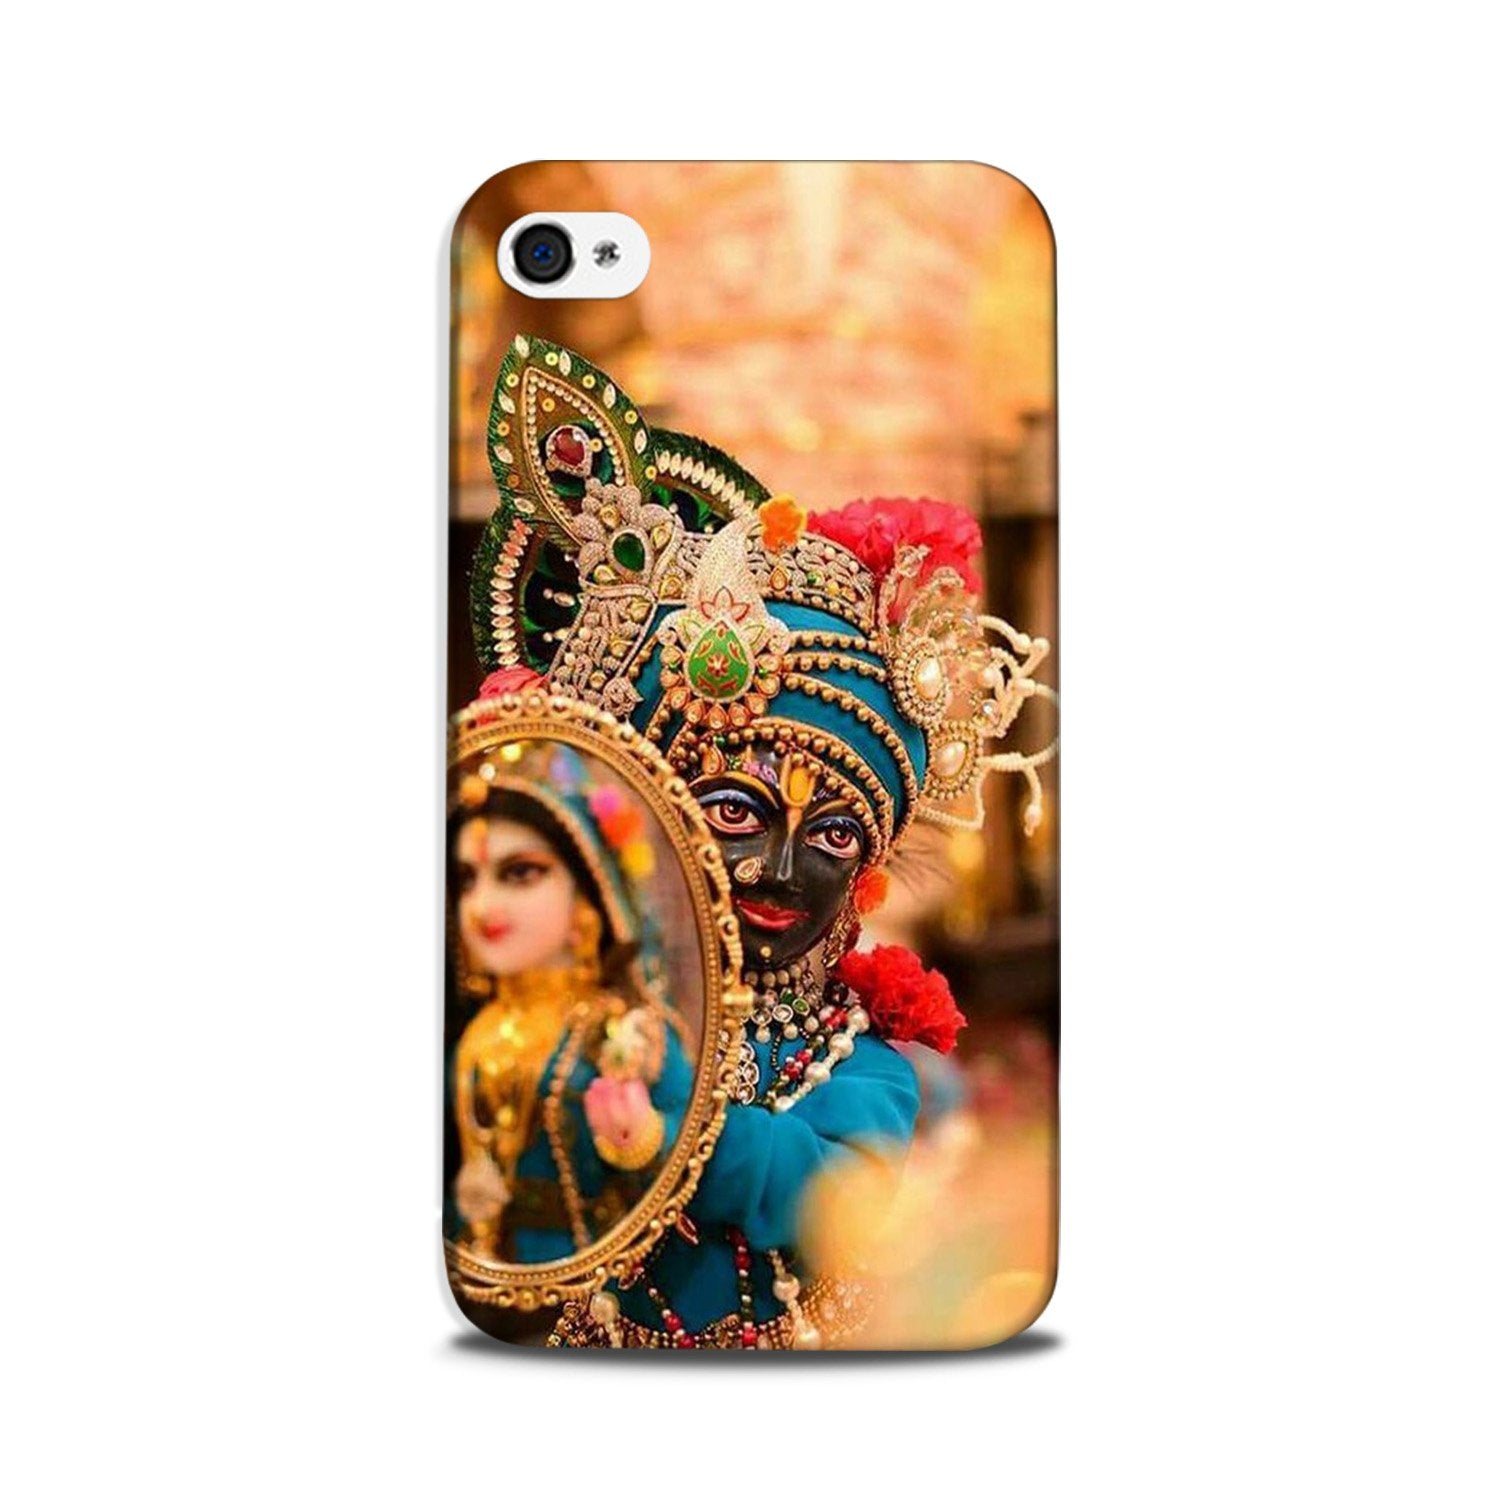 Lord Krishna5 Case for iPhone 5/ 5s